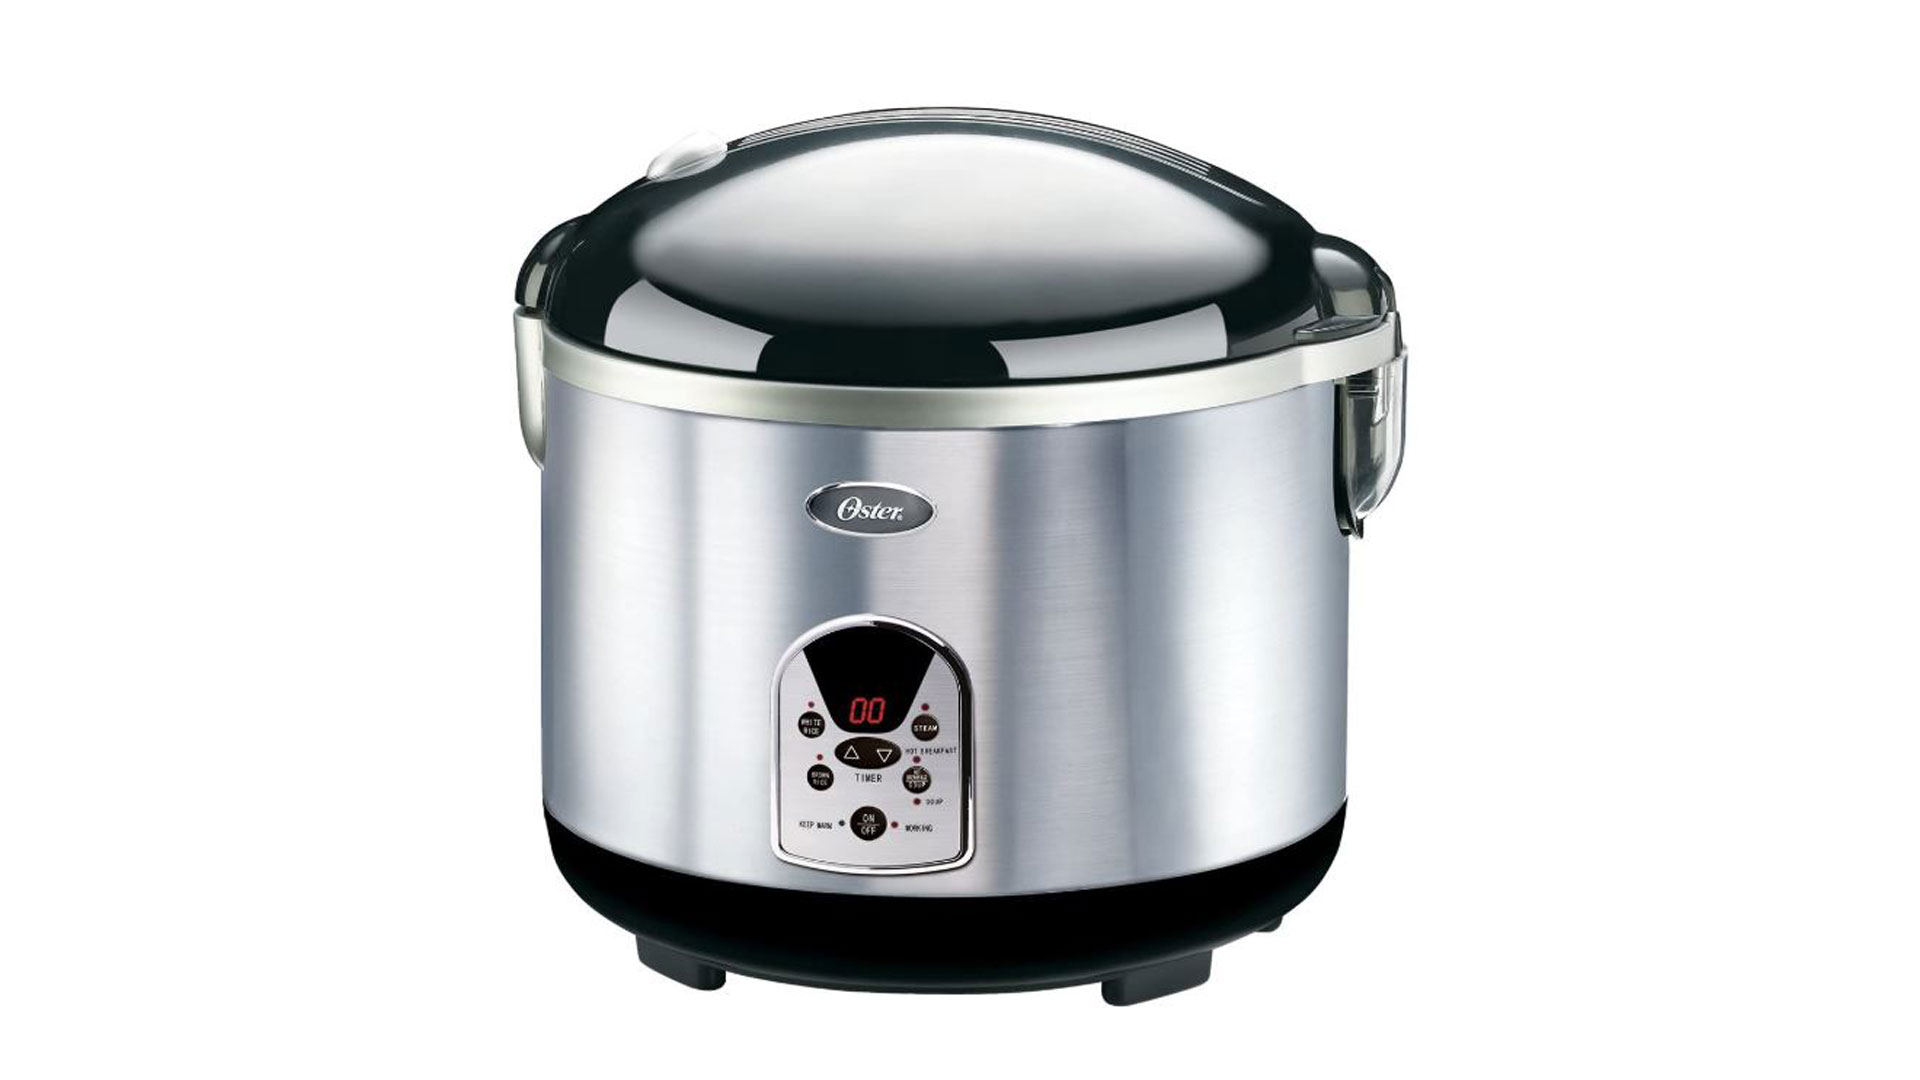 Oster 6 Cup Rice Cooker Black Tested Works Well